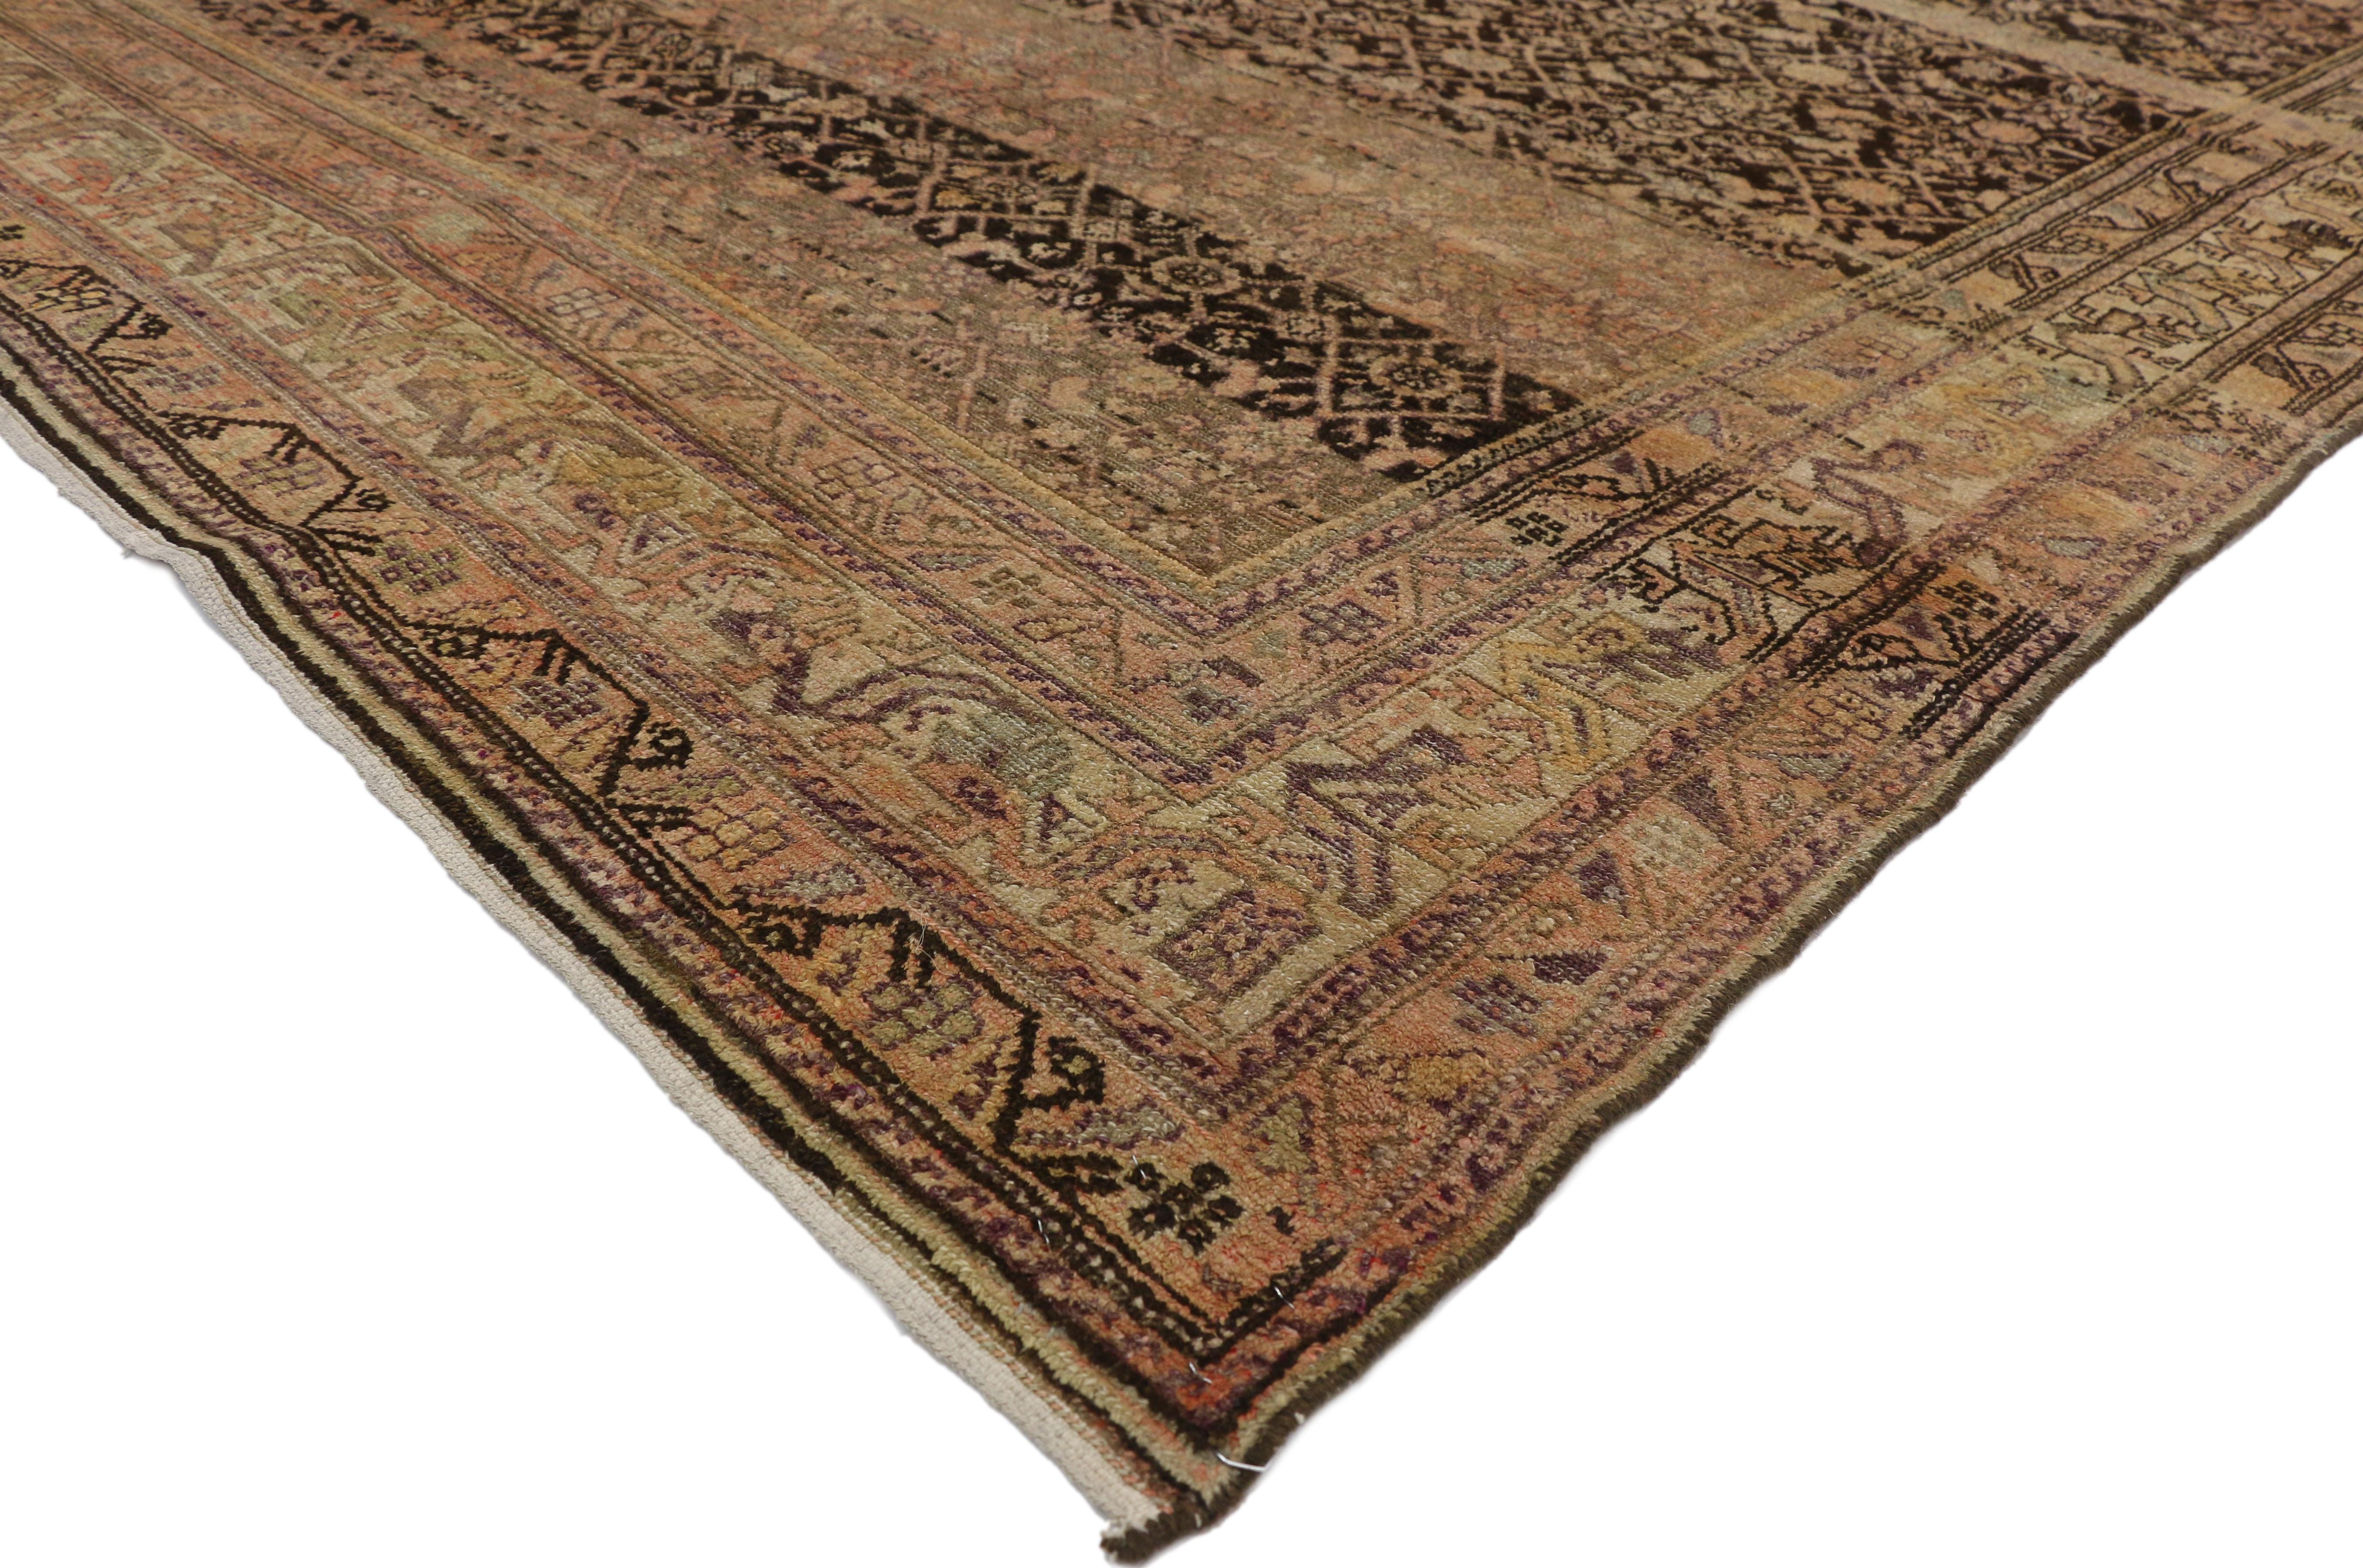 76510 antique Persian Malayer Gallery rug with Herati Design, Long Living Room rug. This hand knotted wool antique Persian Malayer gallery rug features the all-over Classic Herati design. The all-over Herati pattern is among the most widespread and